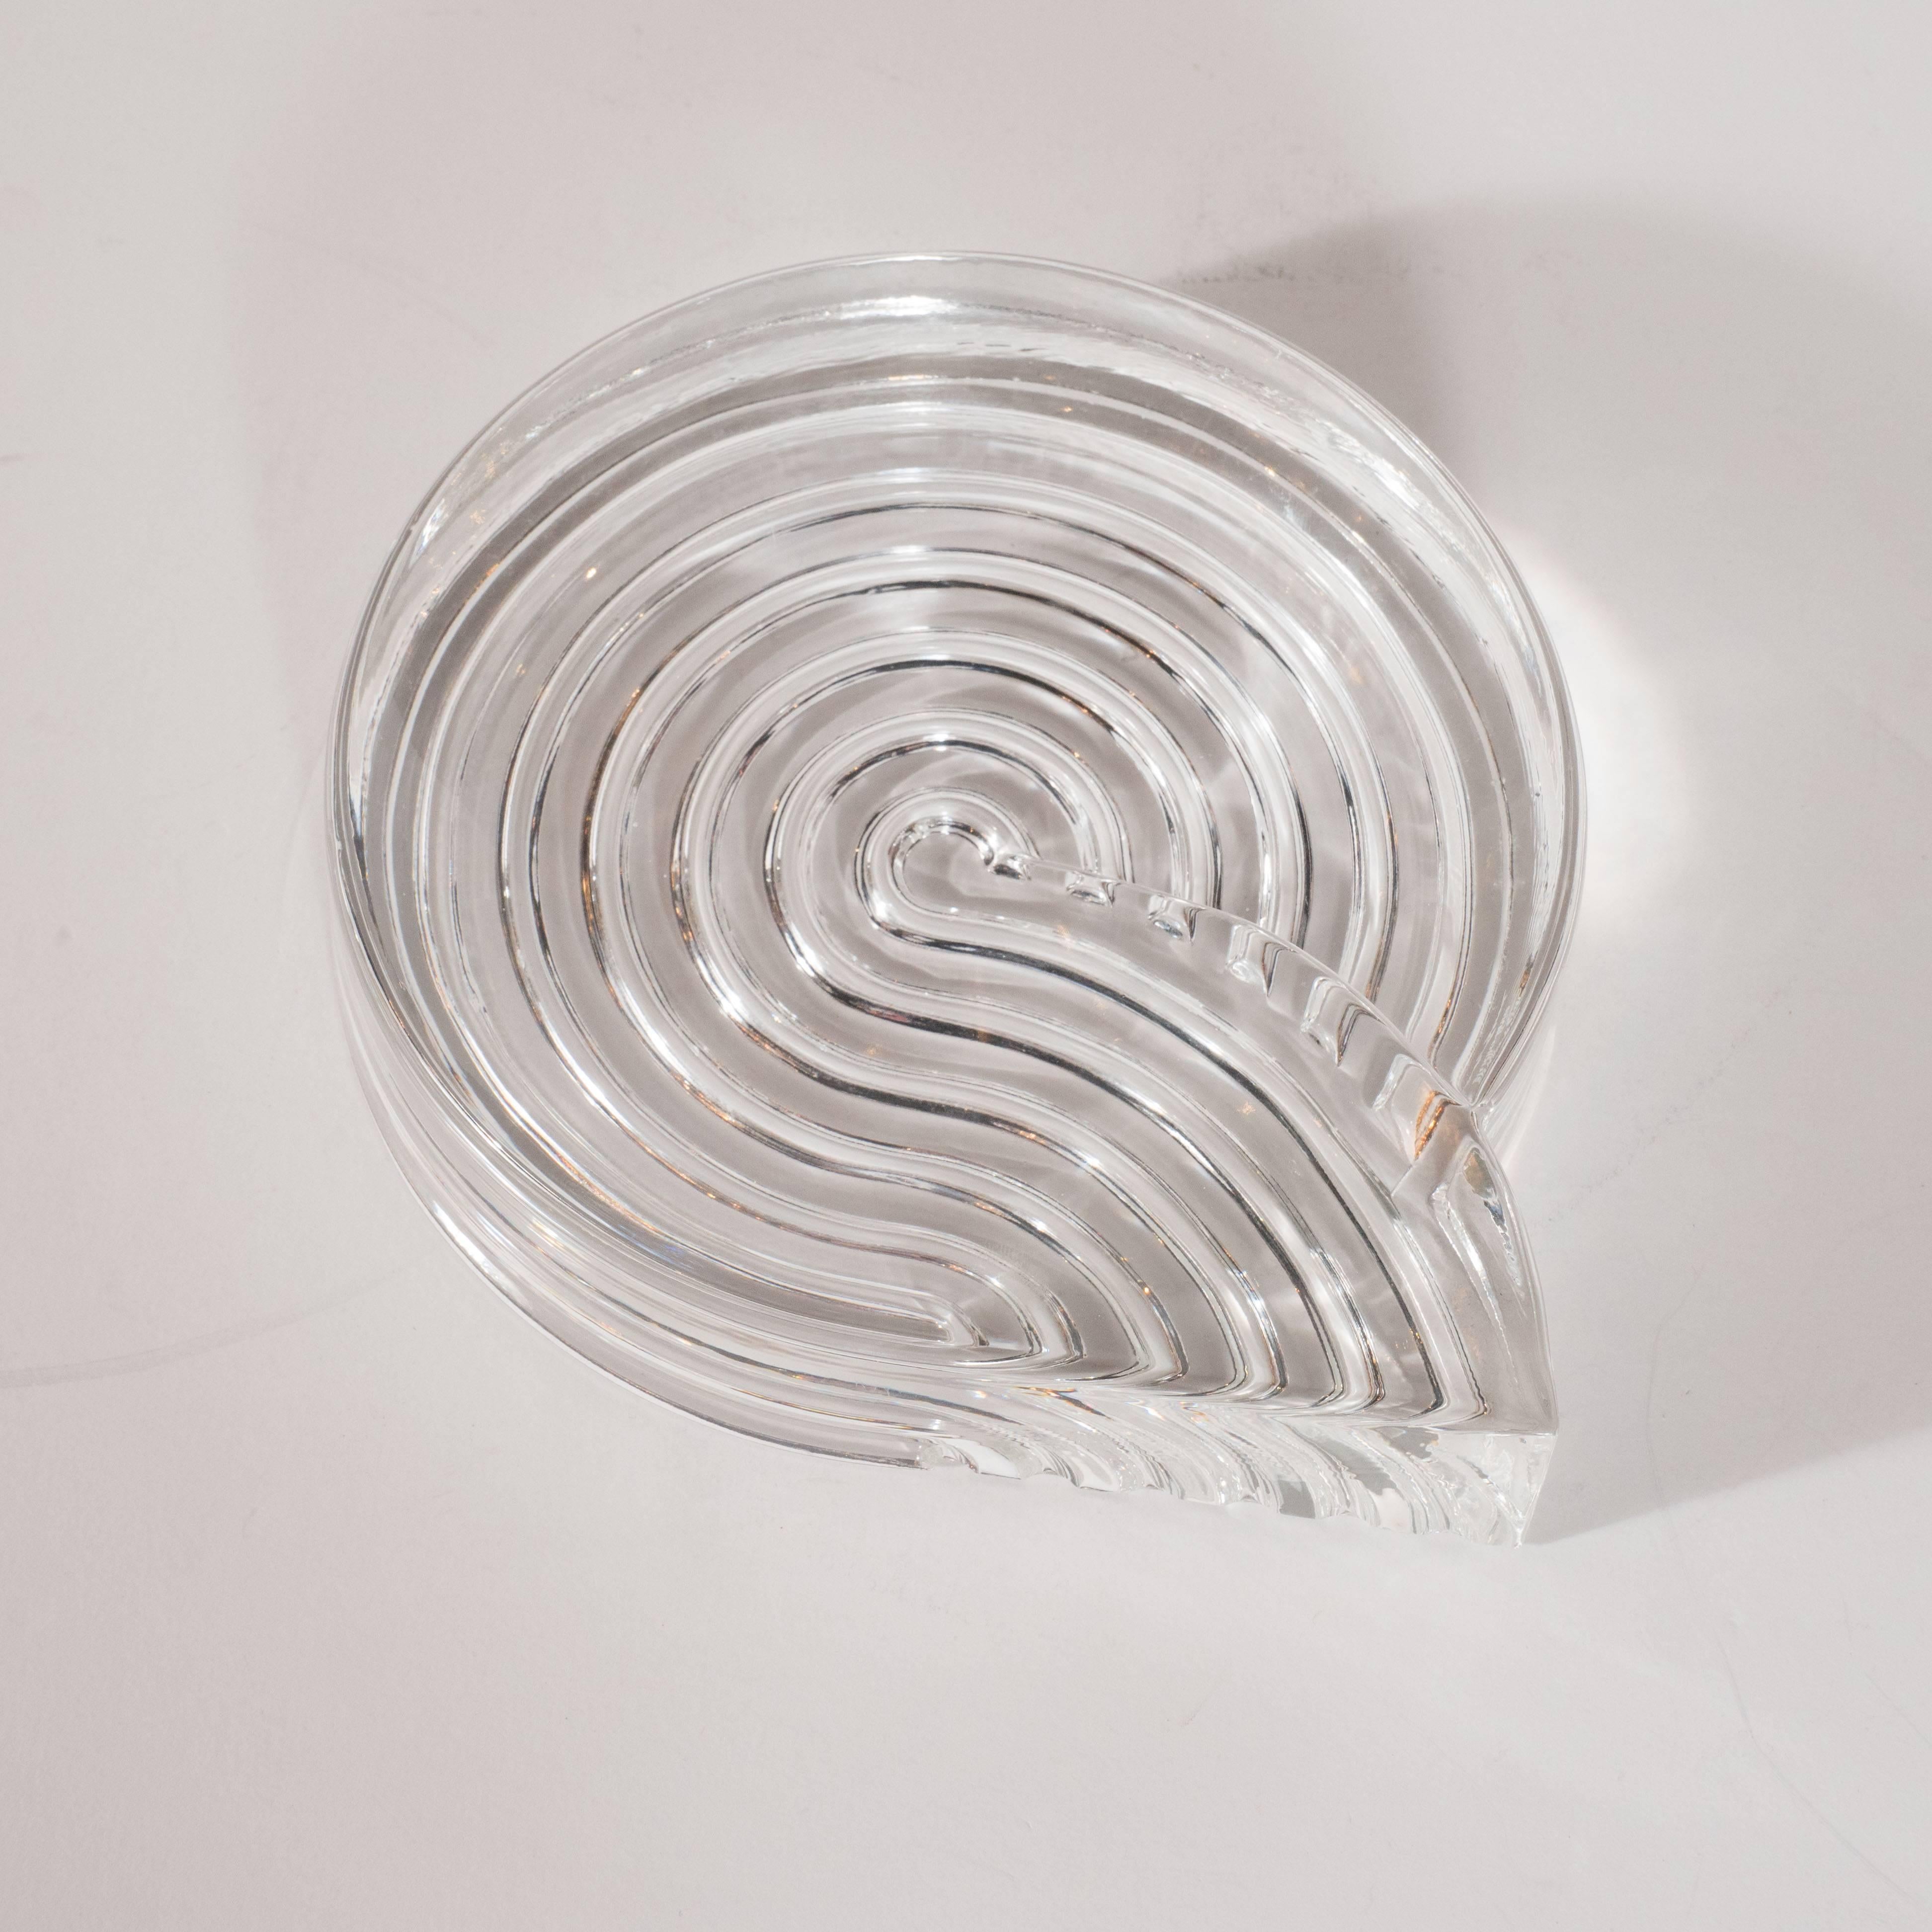 German Signed Mid-Century Modern Glass Ashtray Dish by Natale Sapone for Rosenthal